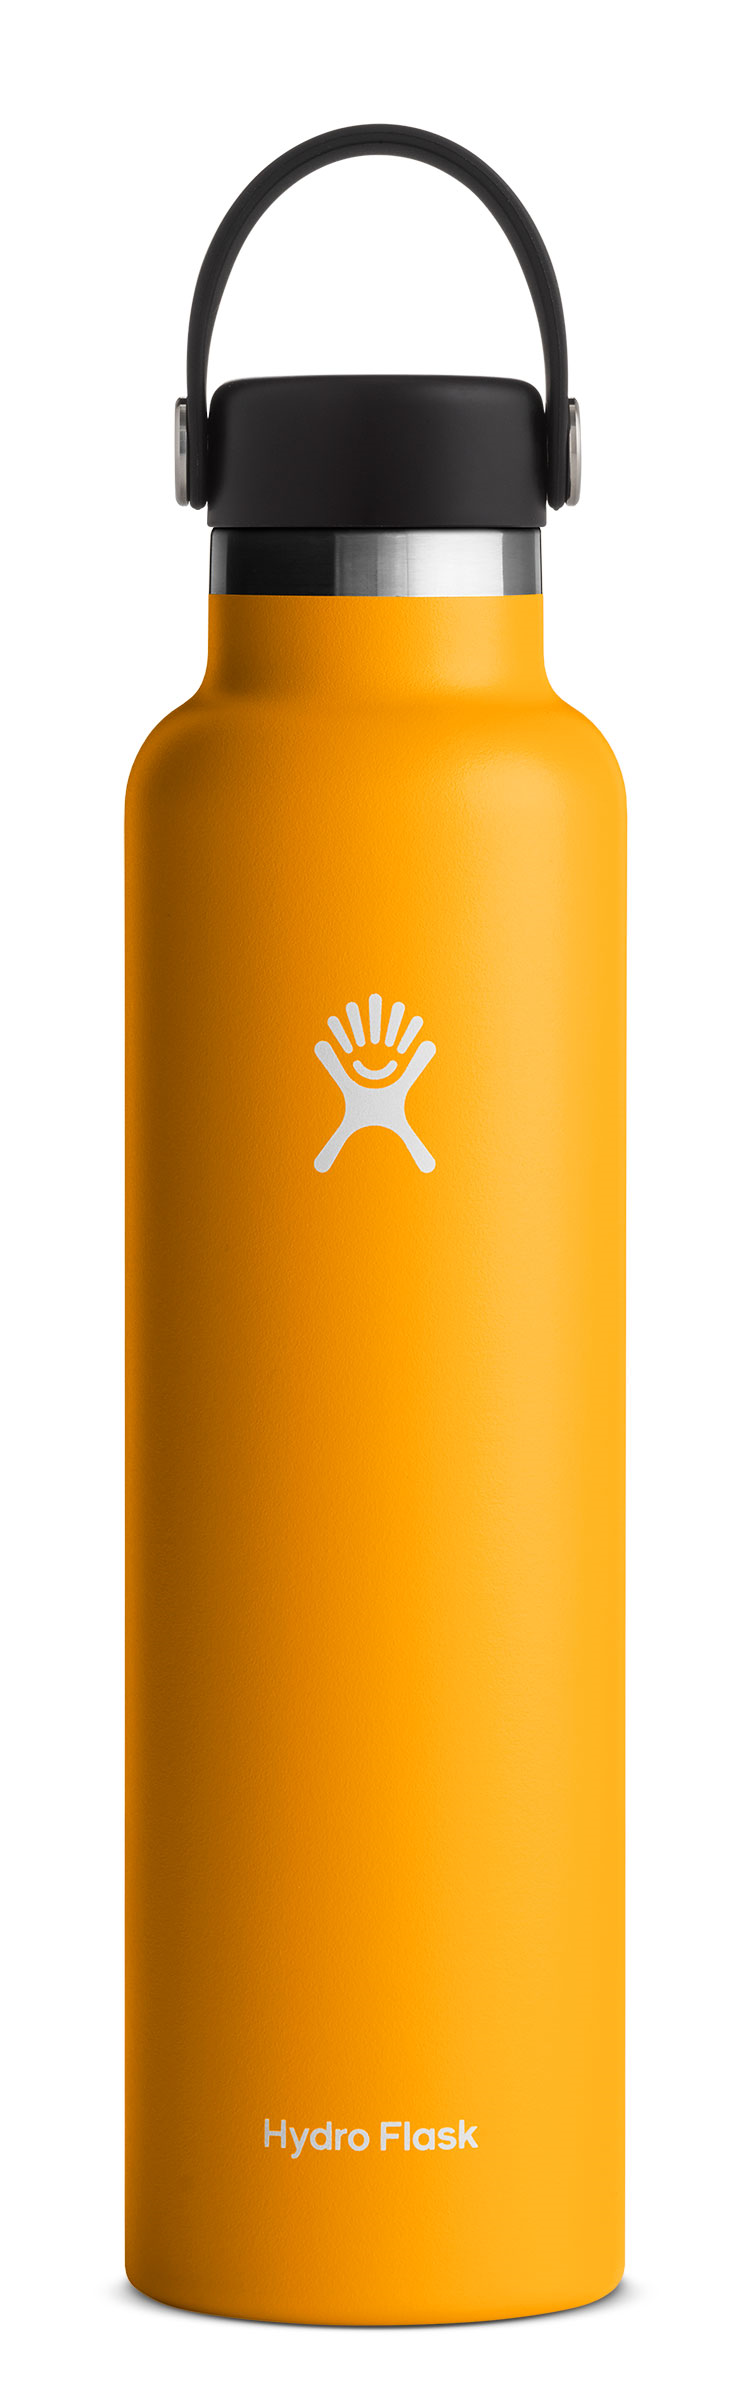 Hydro Flask 24- oz Standard Mouth Water Bottle (Assorted Colors